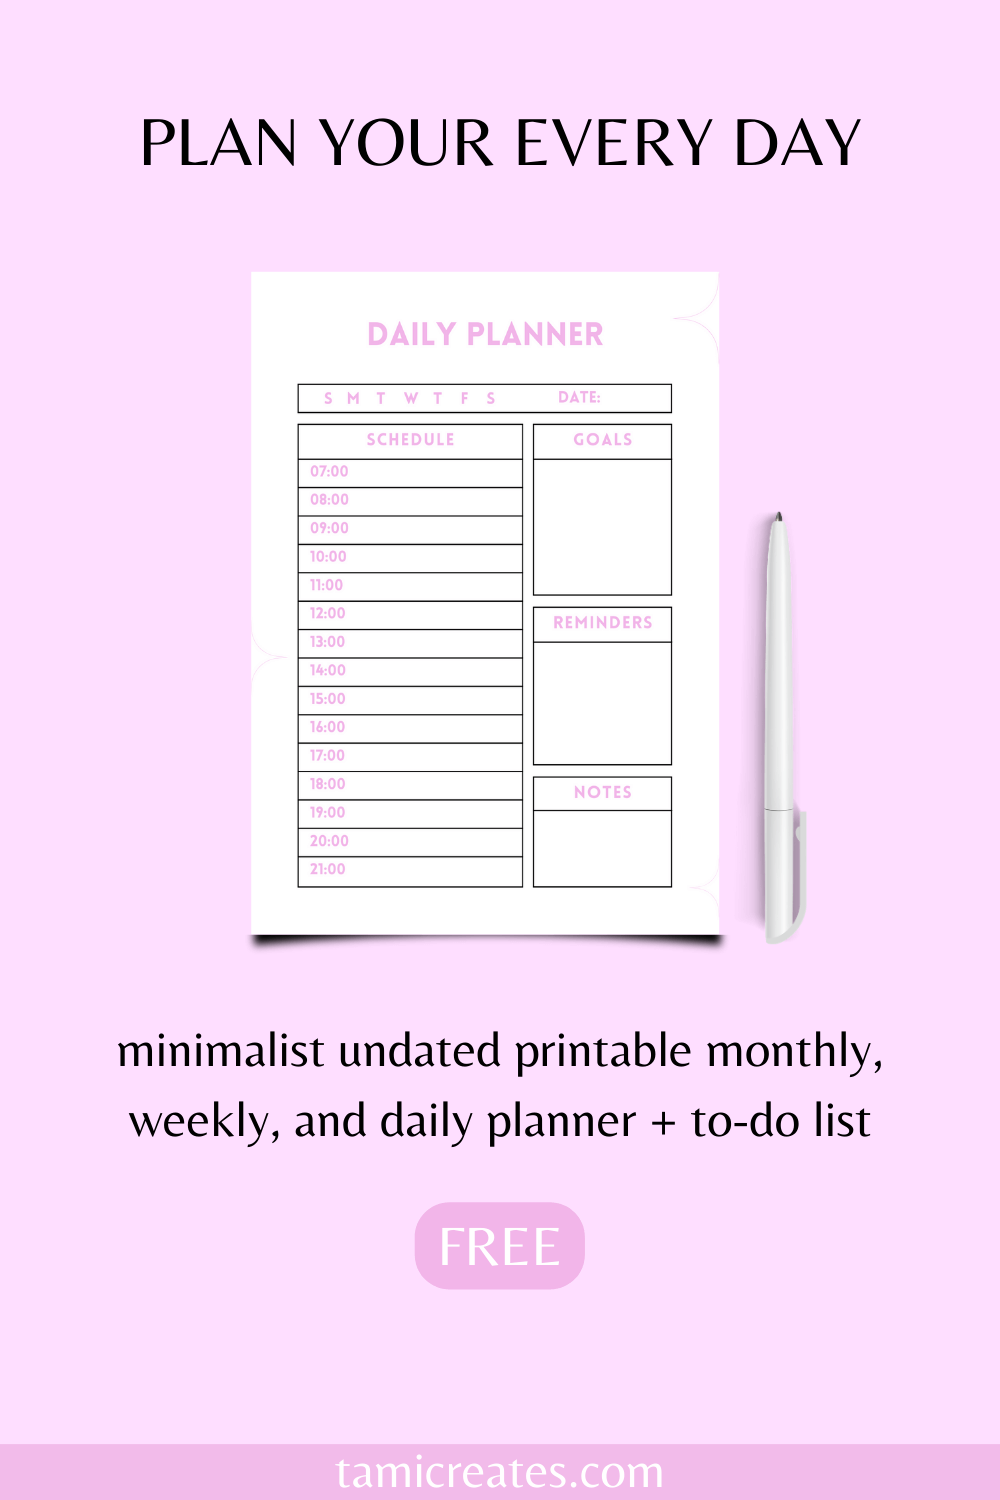 Here's how to be more productive, manage your time better, and get more done every single day. Plus a free printable 5-page planner! #freeplanner #freeprintable #printableplanner #productivity